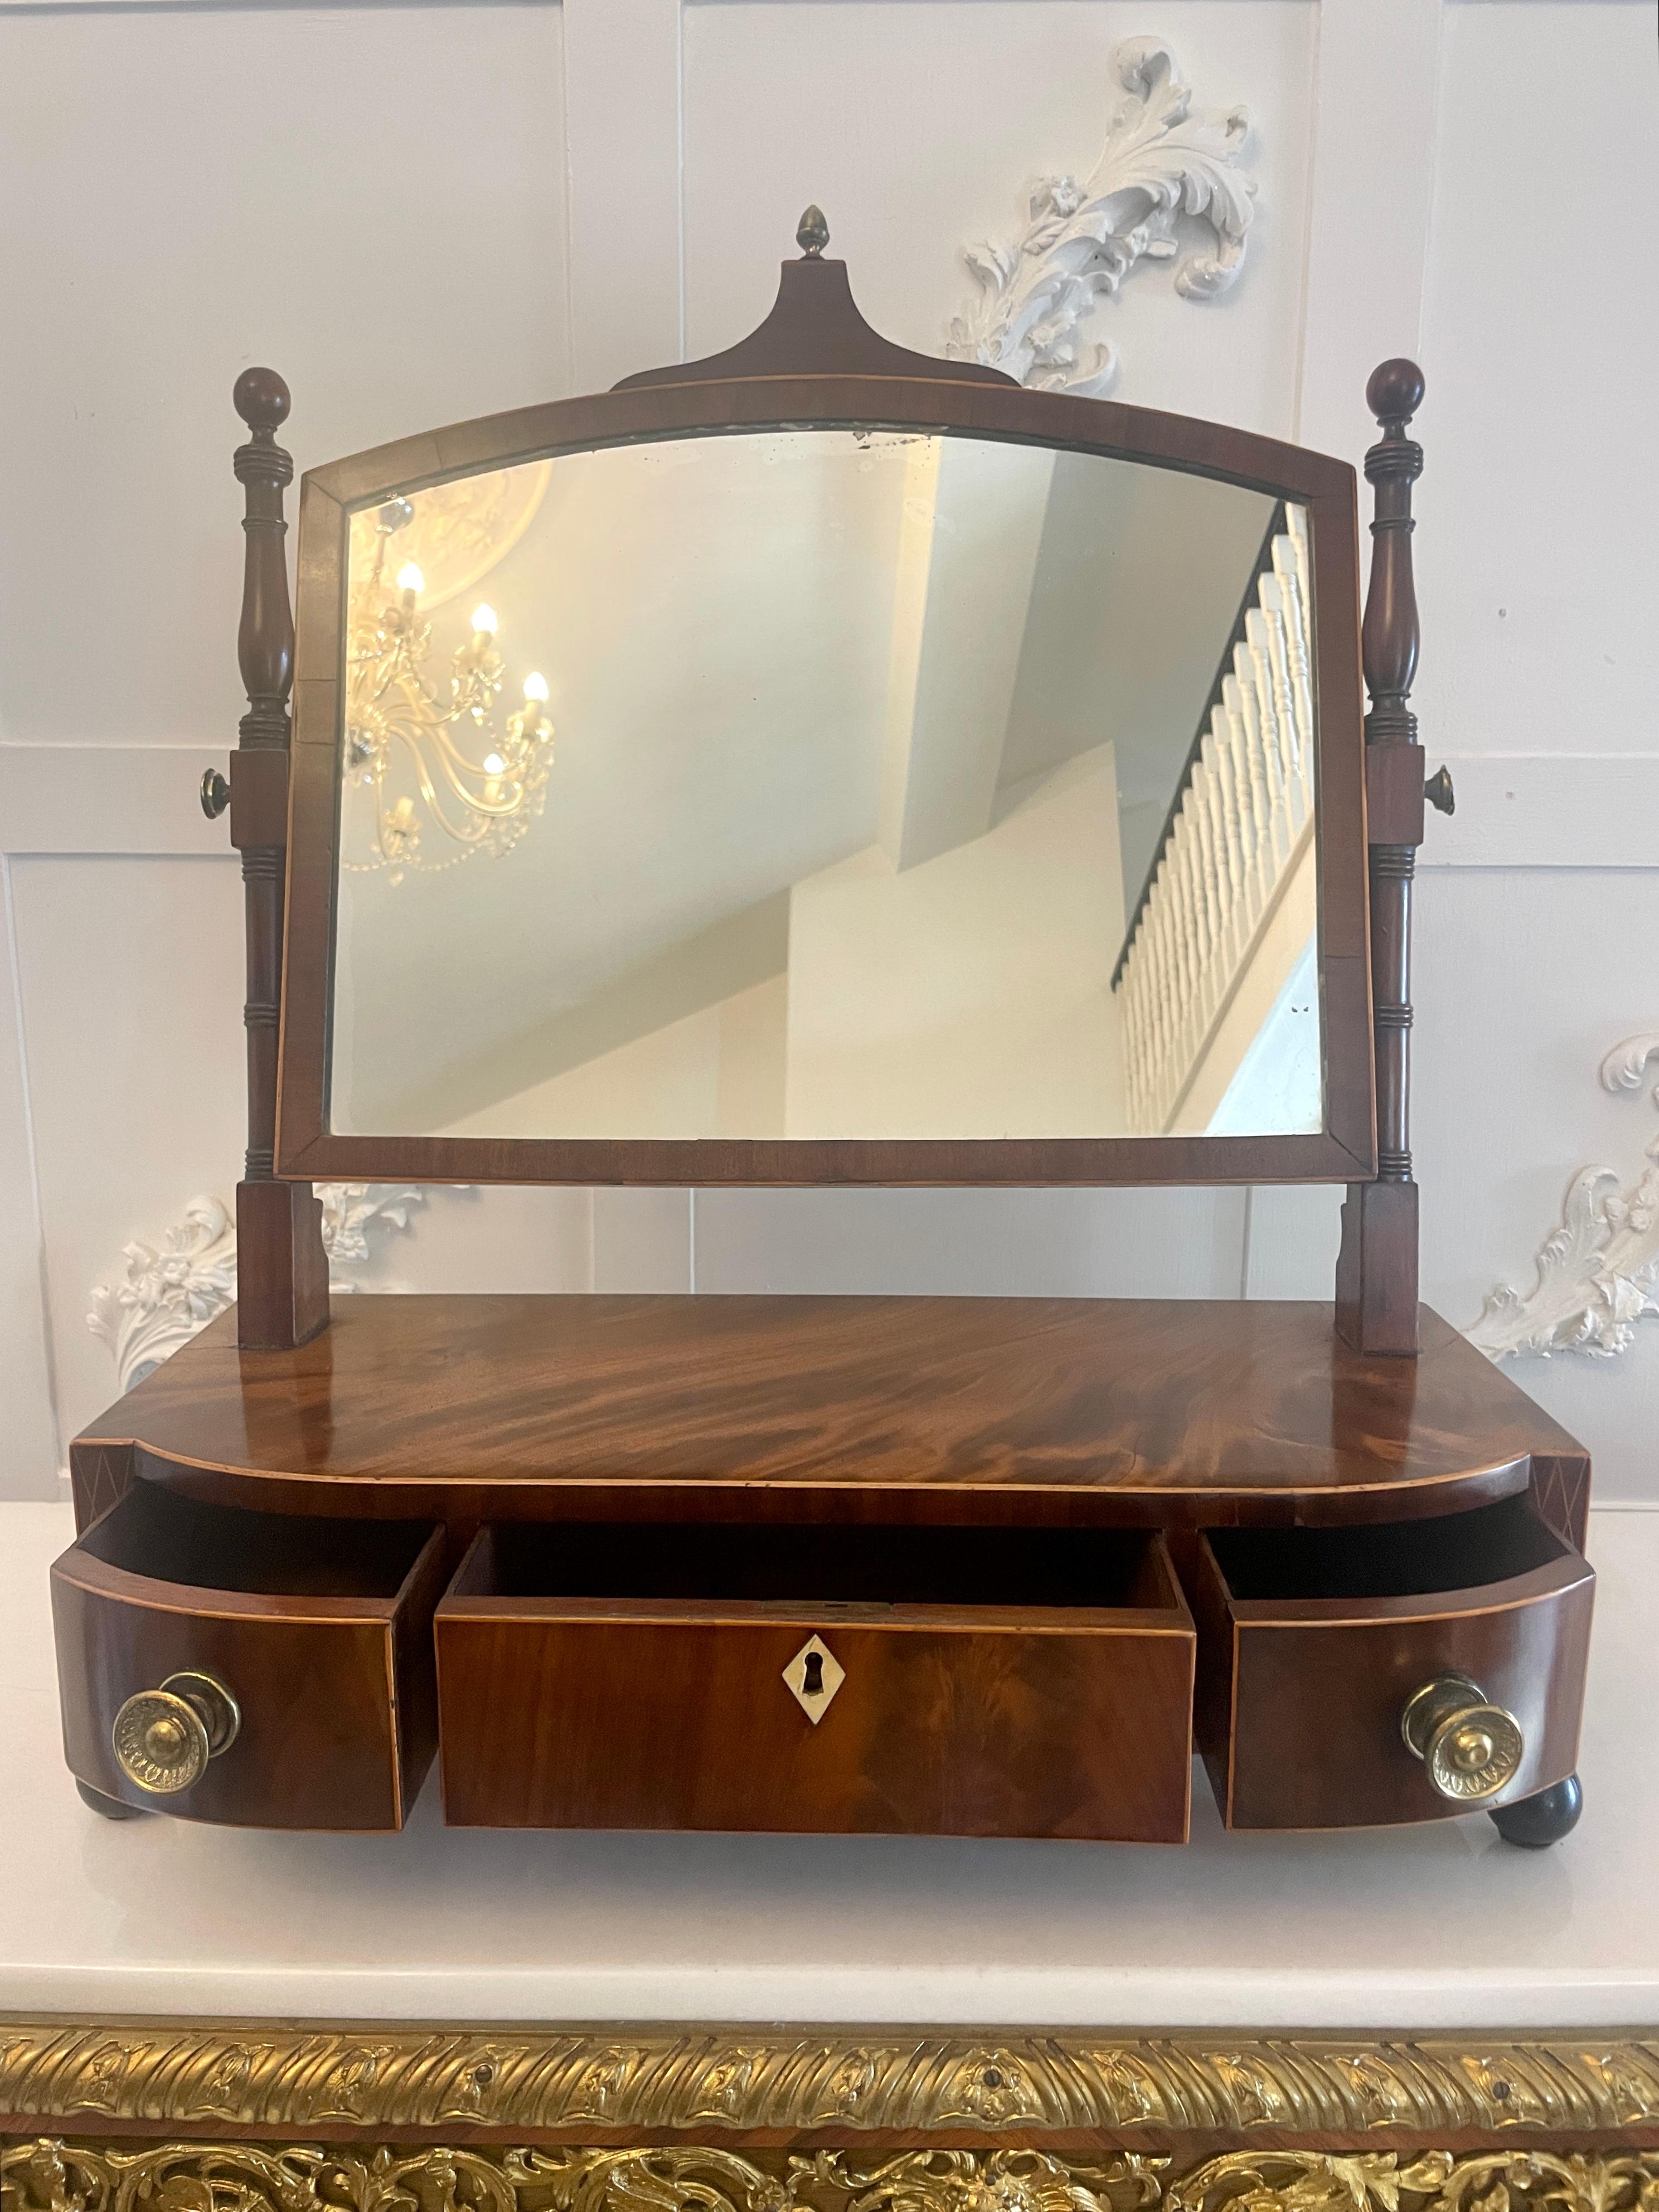 Antique George lII quality figured mahogany dressing table mirror having the original mirror plate in a quality figured mahogany and satinwood stringing inlaid frame supported by elegant turned mahogany columns standing on a bow fronted base with